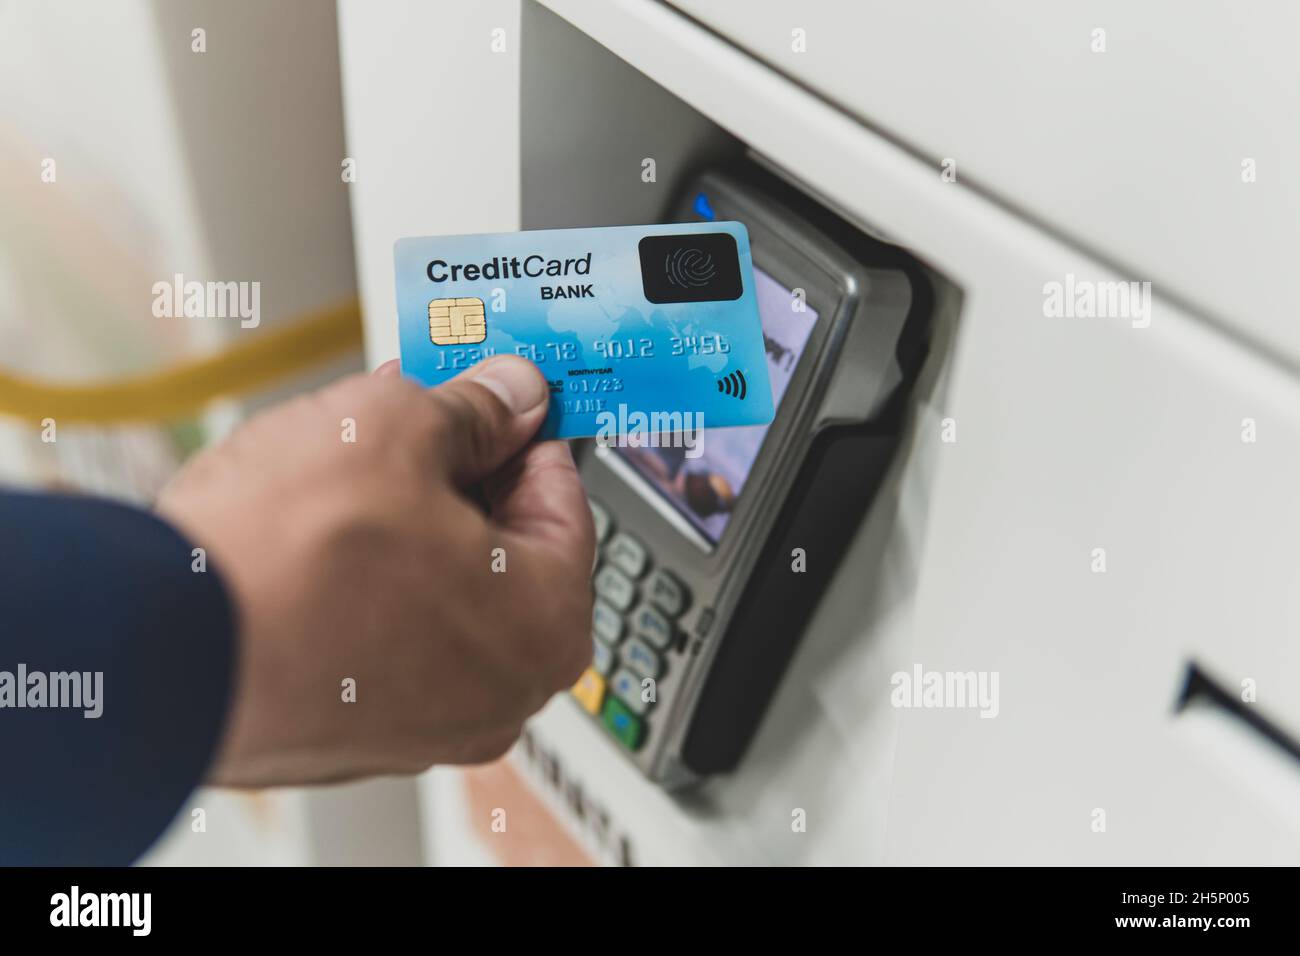 Man paying with NFC technology on credit card, restaurant, shop. Contactless ticket payment. Stock Photo